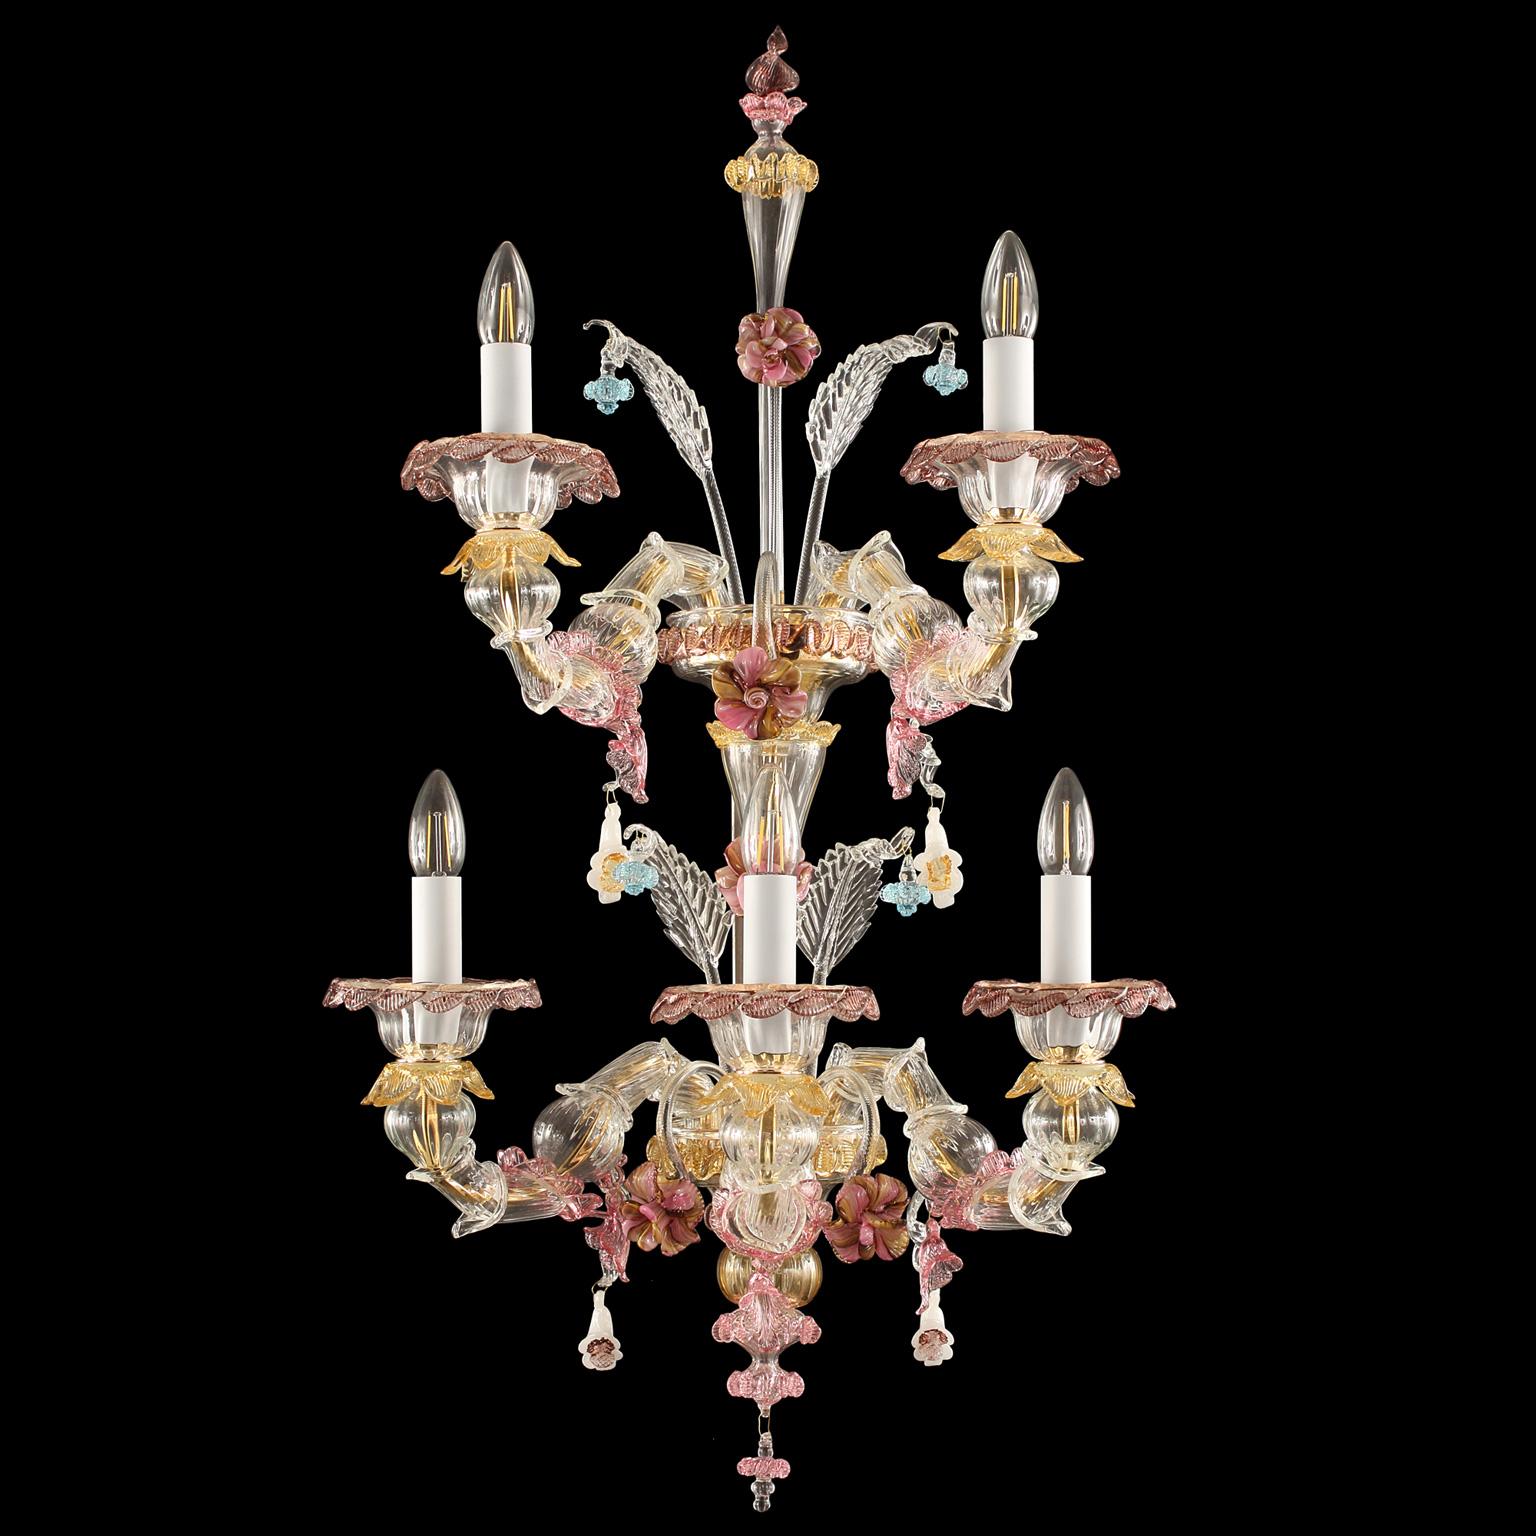 Toffee wall, 3+2 lights, double tier, rezzonico style crystal Murano glass, polychrome details by Multiforme

The Toffee collection is elegant and delicate thanks to the coloured details with pastel tones. The structure is a combination of